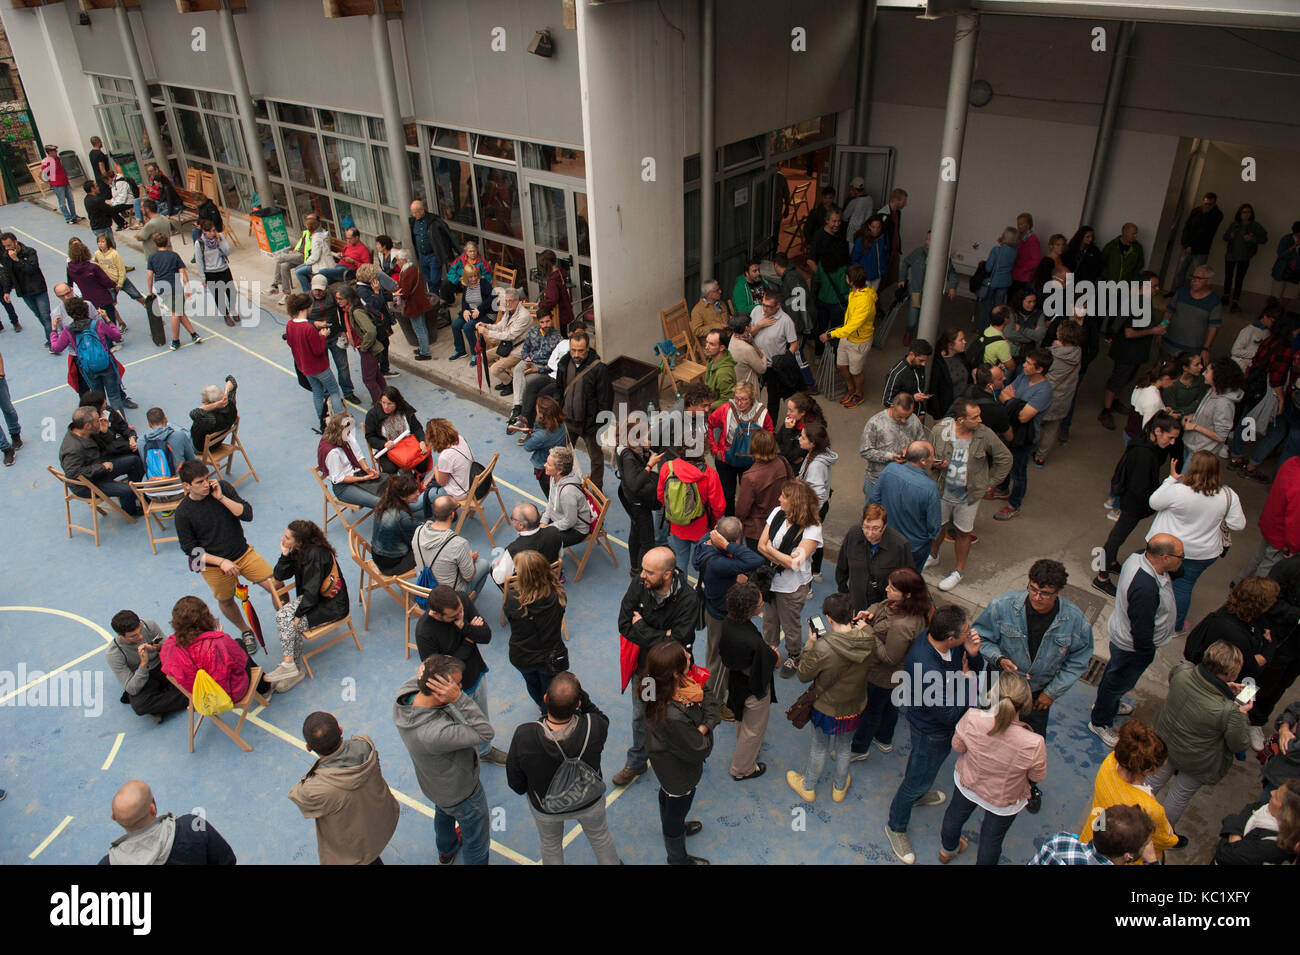 Barcelona, Catalonia. October 1, 2017. Festive atmosphere and some tension minutes before closing the polling station 'La llacuna del Poblenou'. Credit: Charlie Perez/Alamy Live News Stock Photo